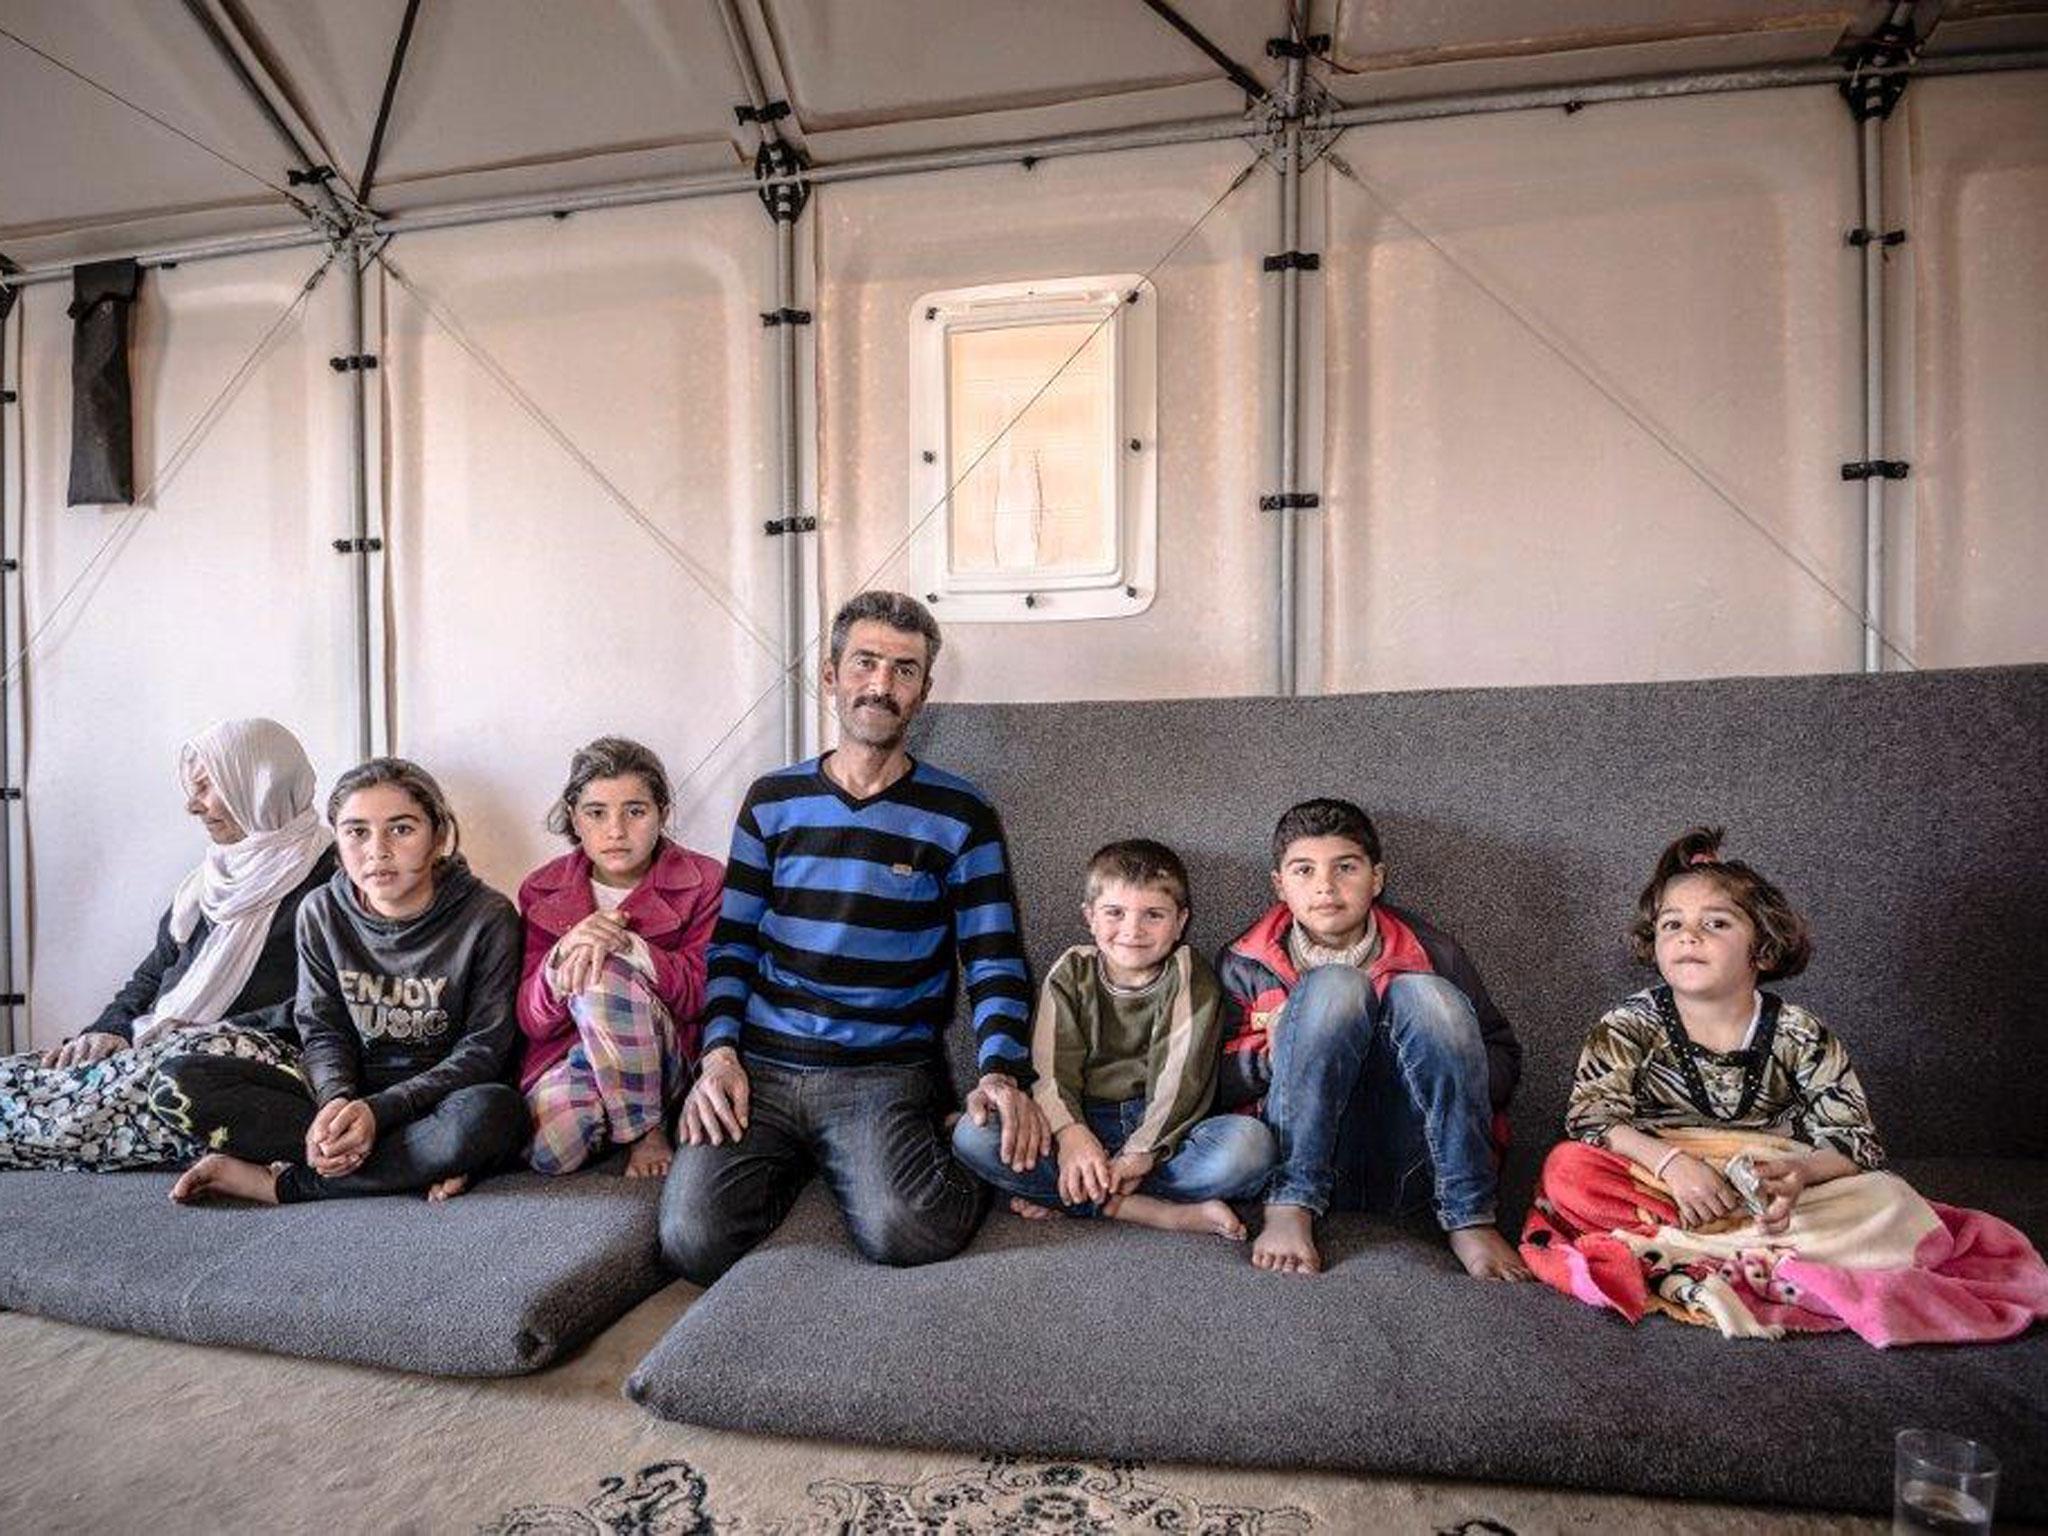 Riyad with sons, daughters and mother in law inside a Better Shelter prototype, Kawergosk refugee camp, Iraq, March 2015